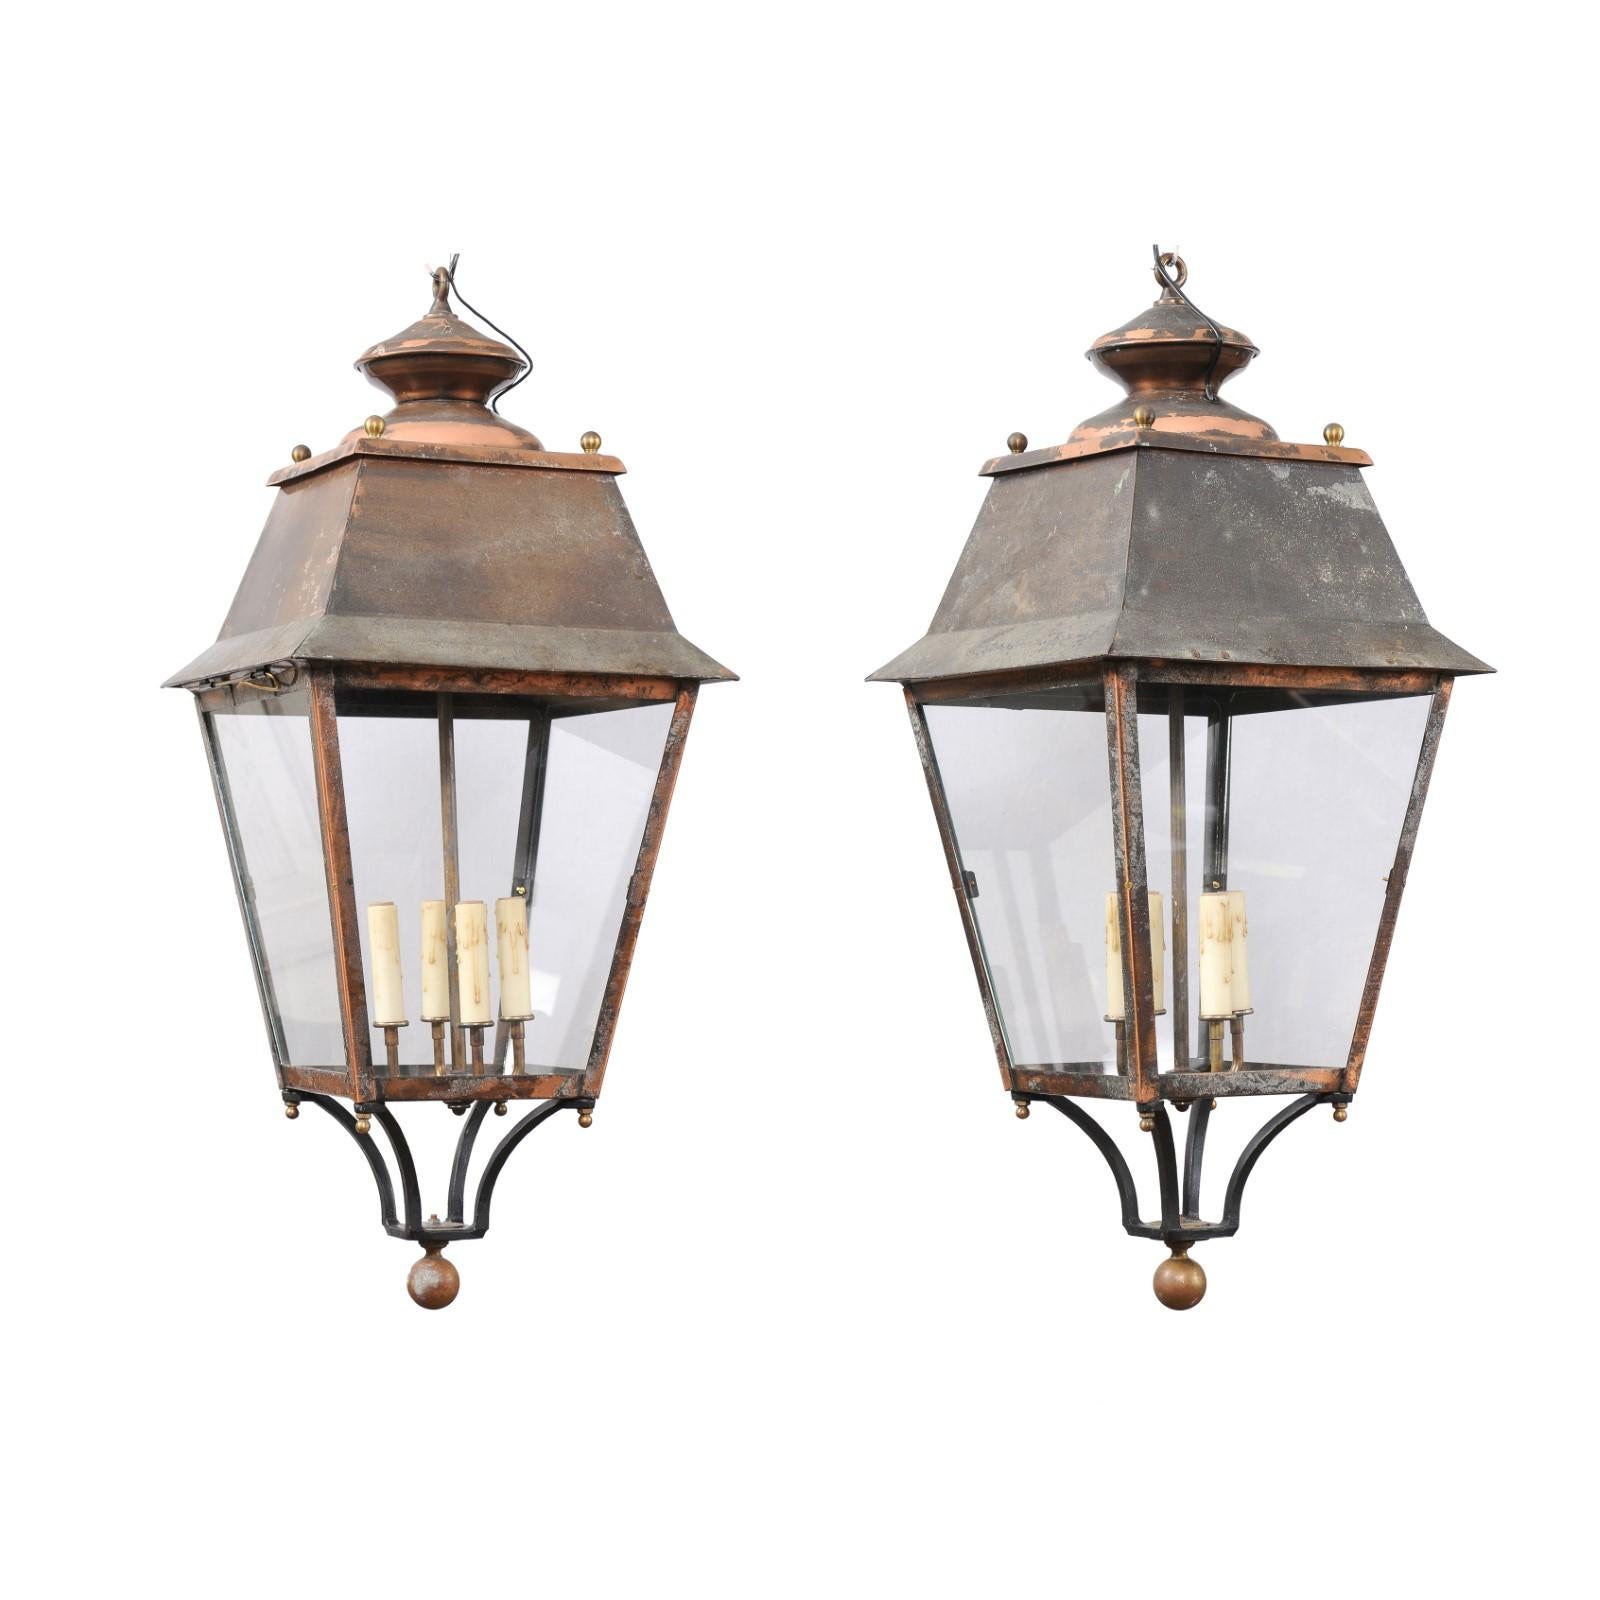 Two French copper lanterns from the 20th century, with four lights, glass panels, petite finial and rustic character. This pair of French copper lanterns, crafted in the 20th century, exudes a timeless allure with their rustic character and